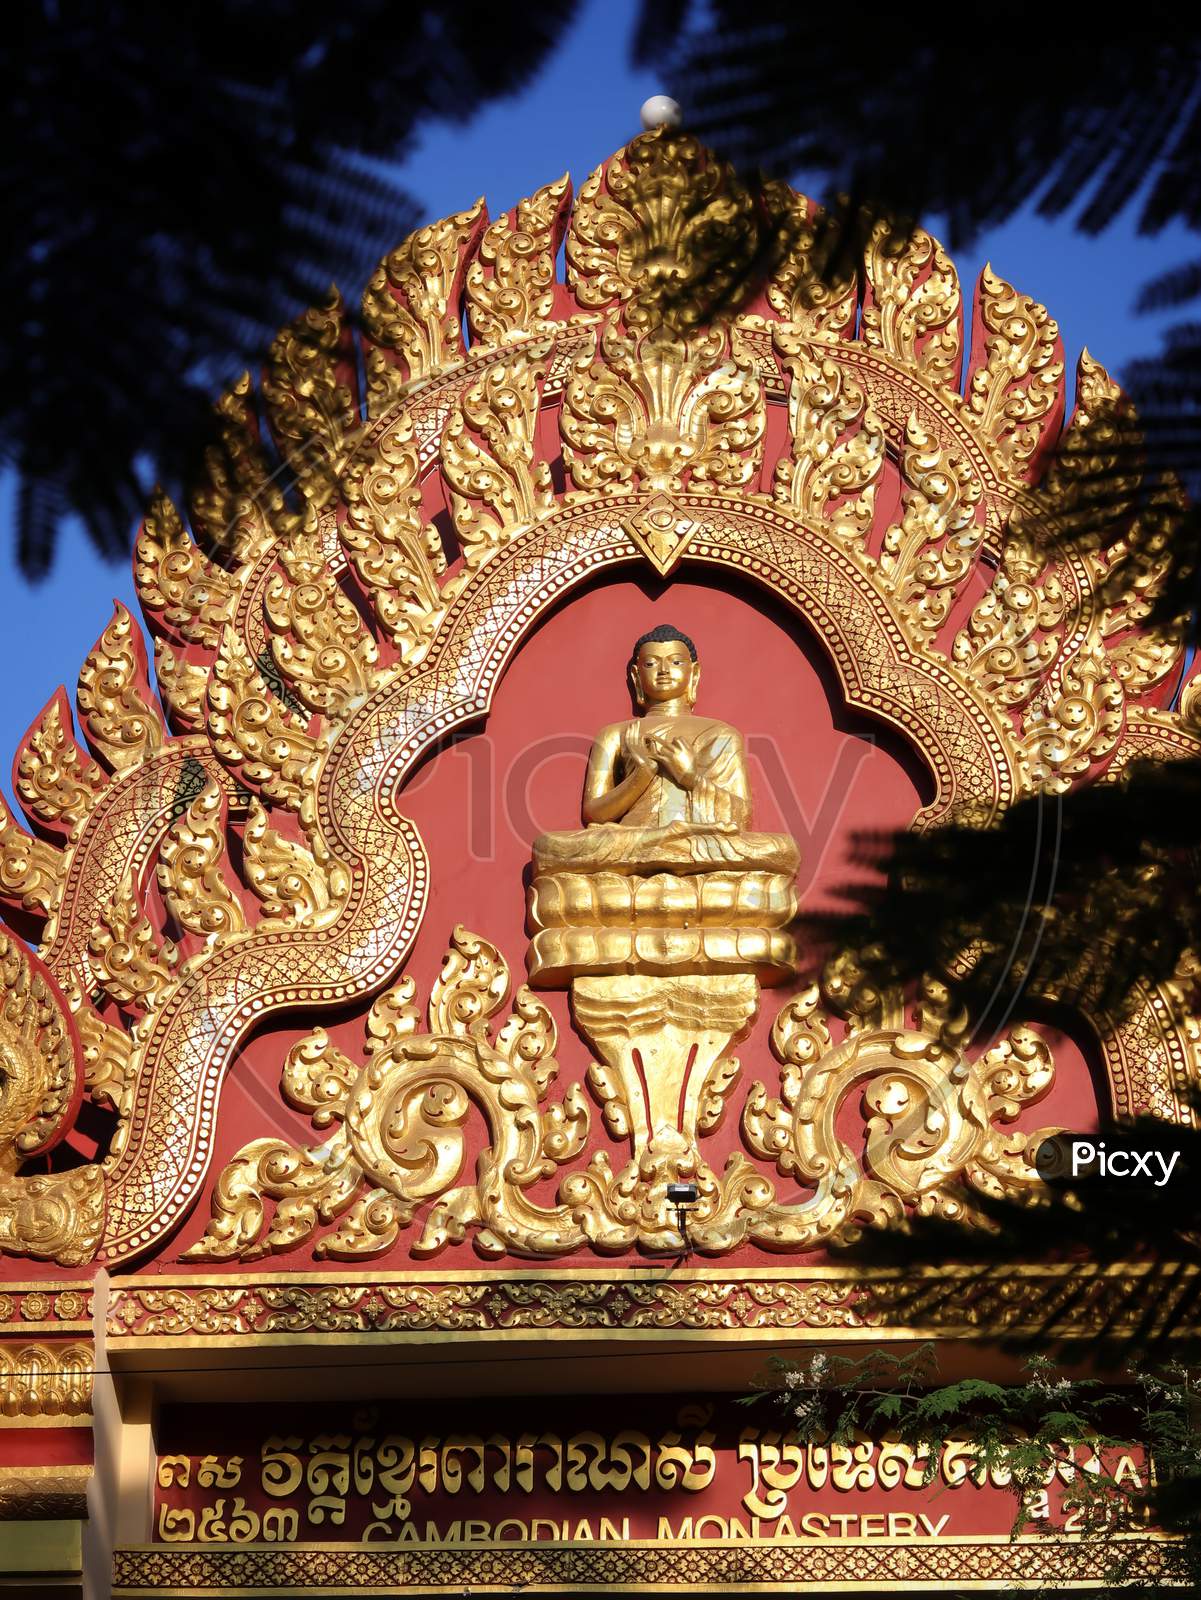 Golden statue of lord Buddha with selective focus.